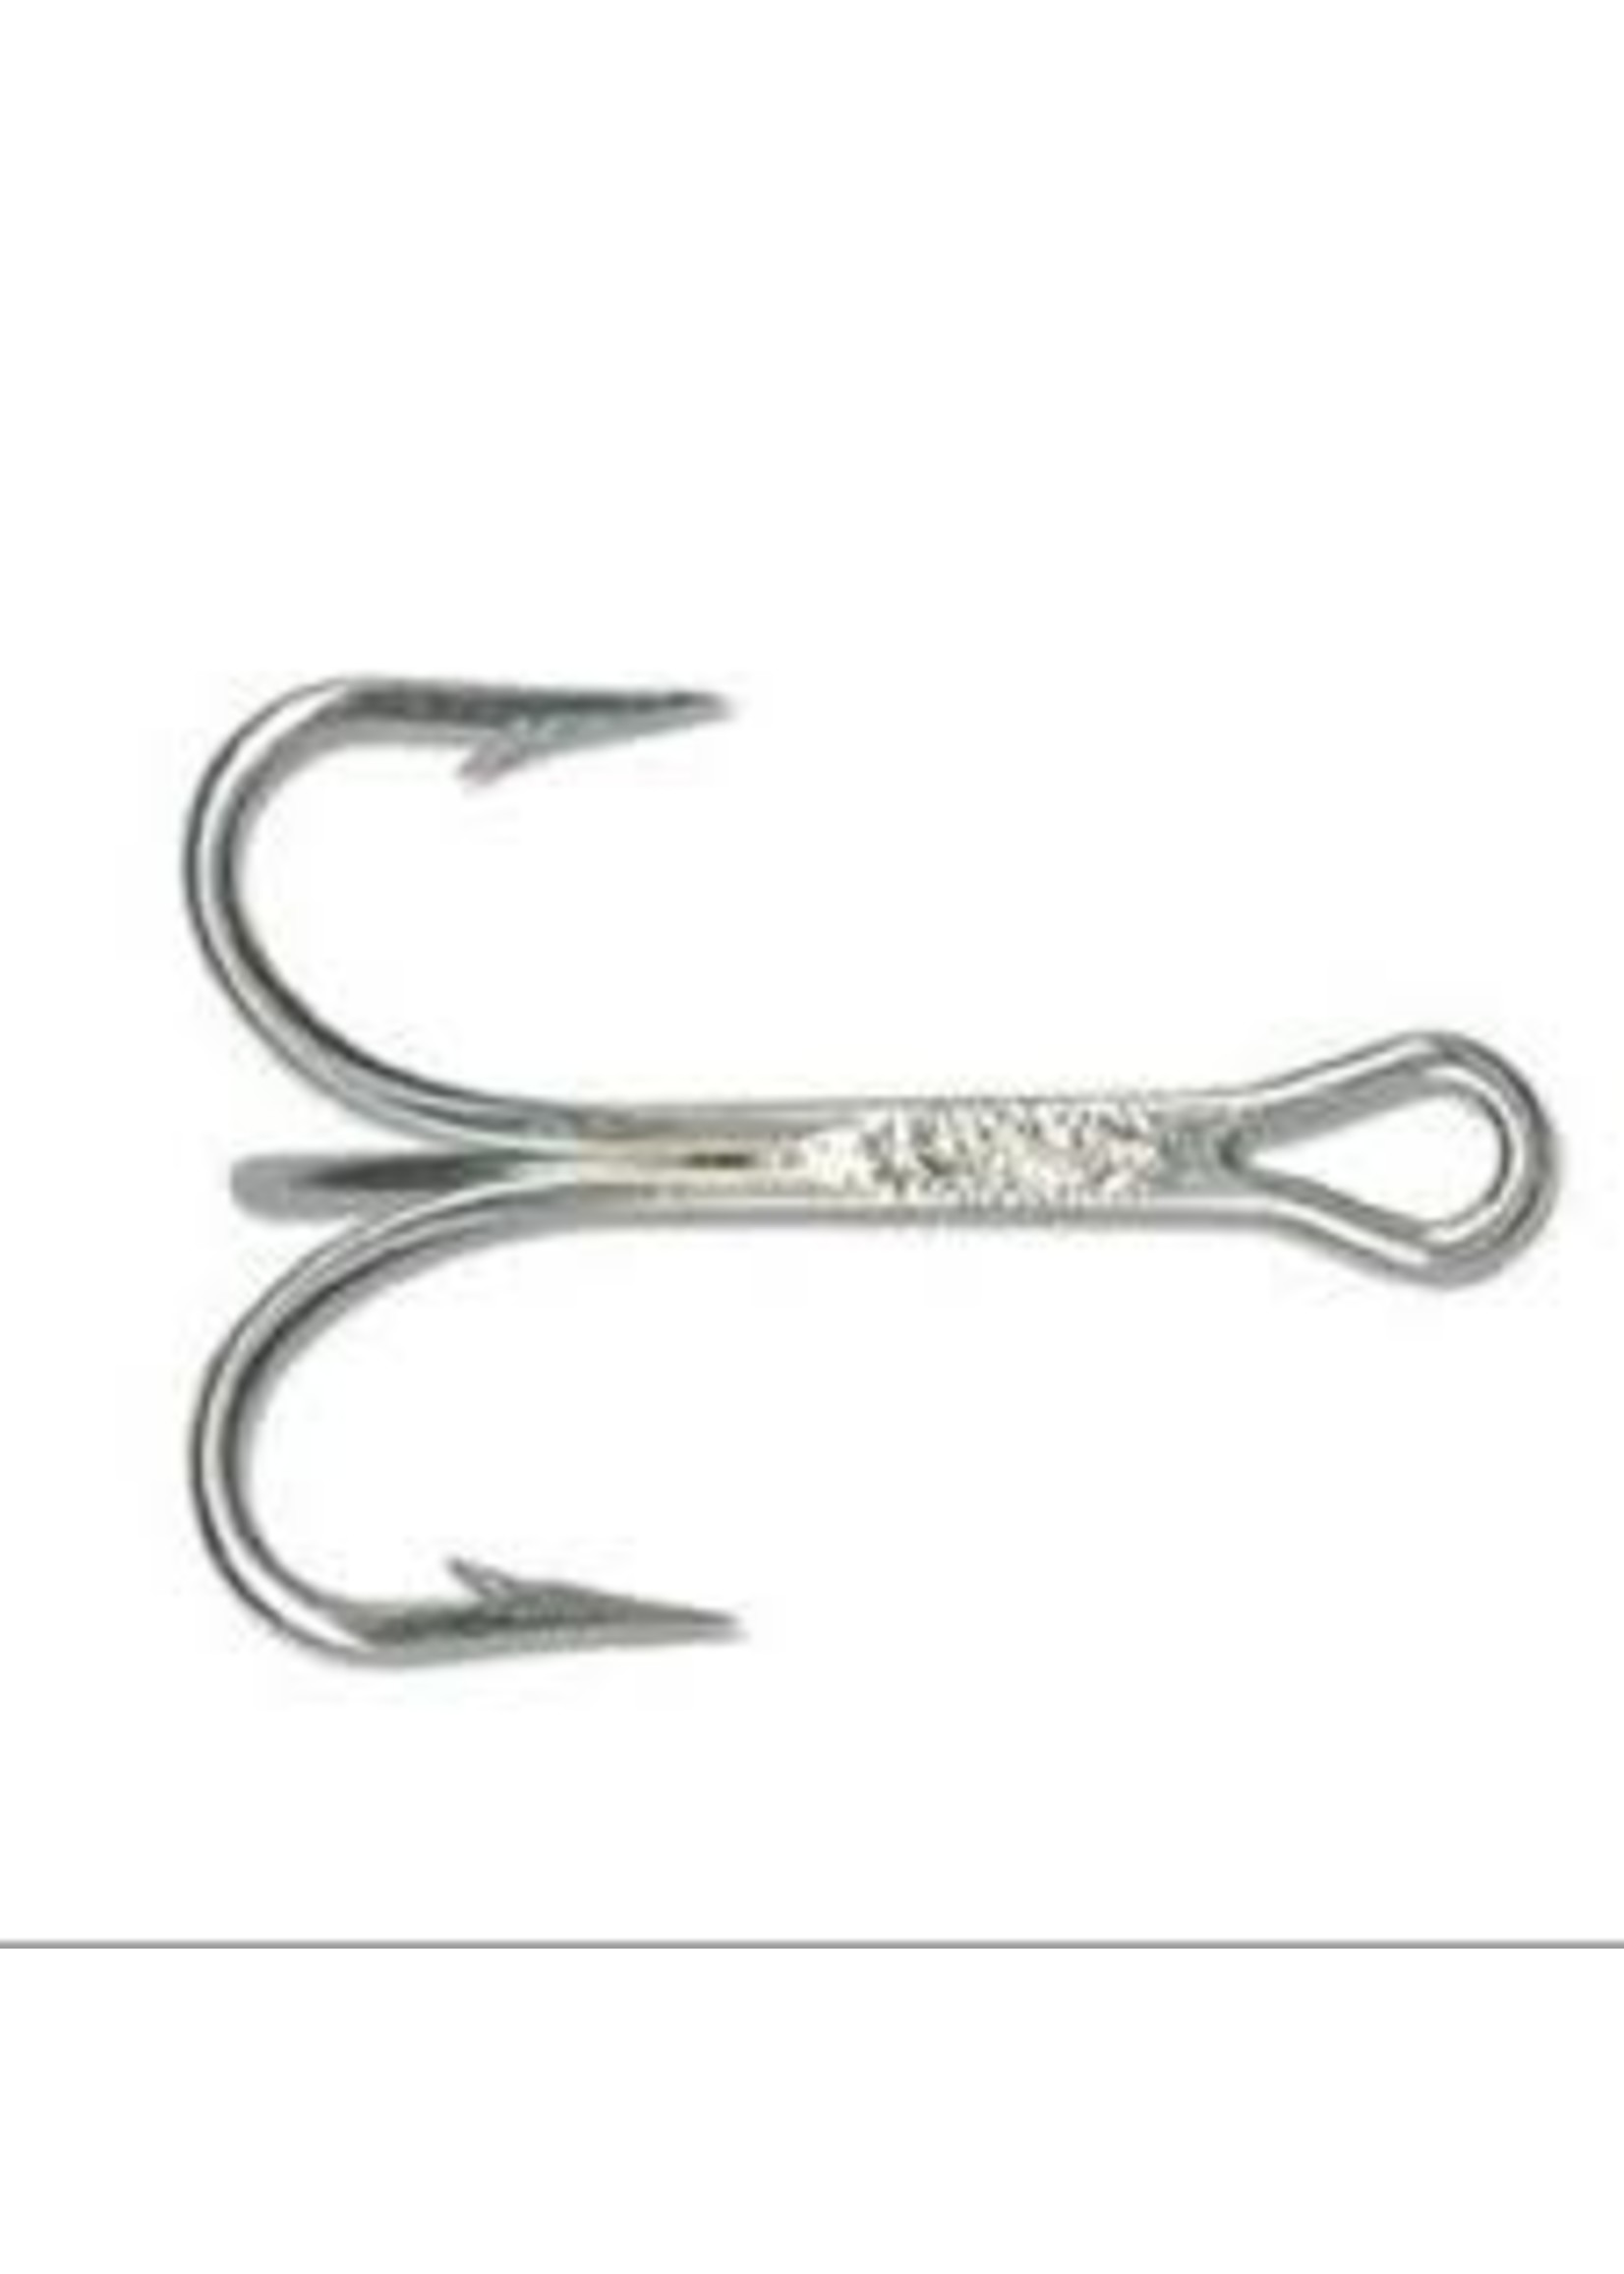 MUSTAD TREBLE HOOK - 3 EXTRA STRONG 4/0 CLASSIC